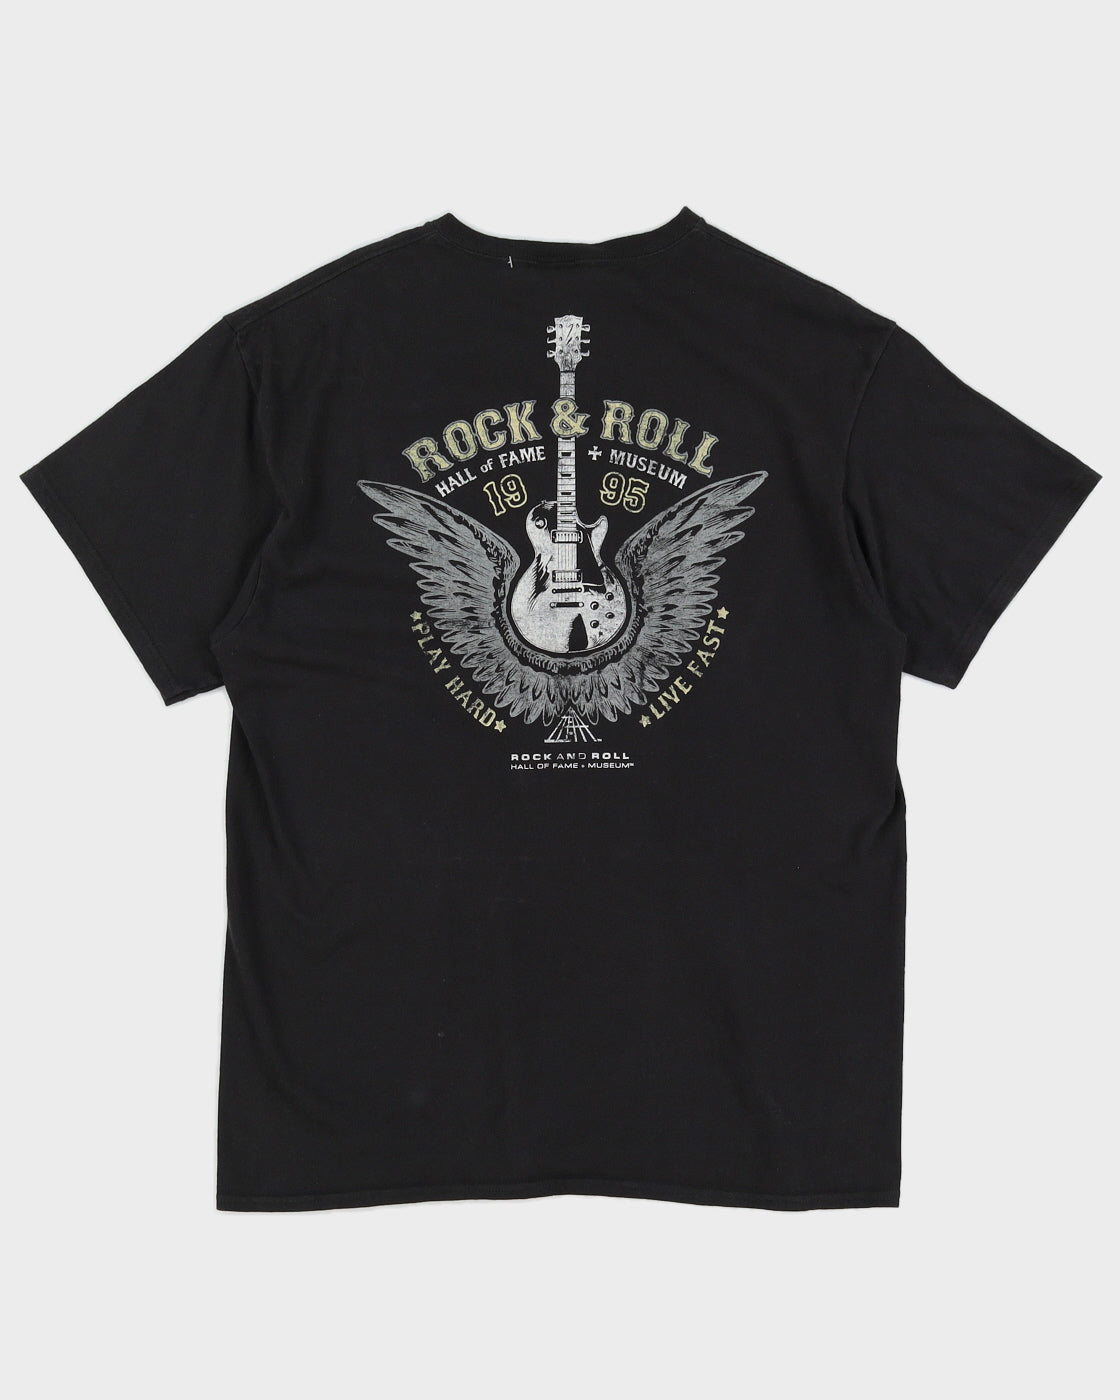 Rock and Roll Hall of Fame and Museum T-Shirt - XL